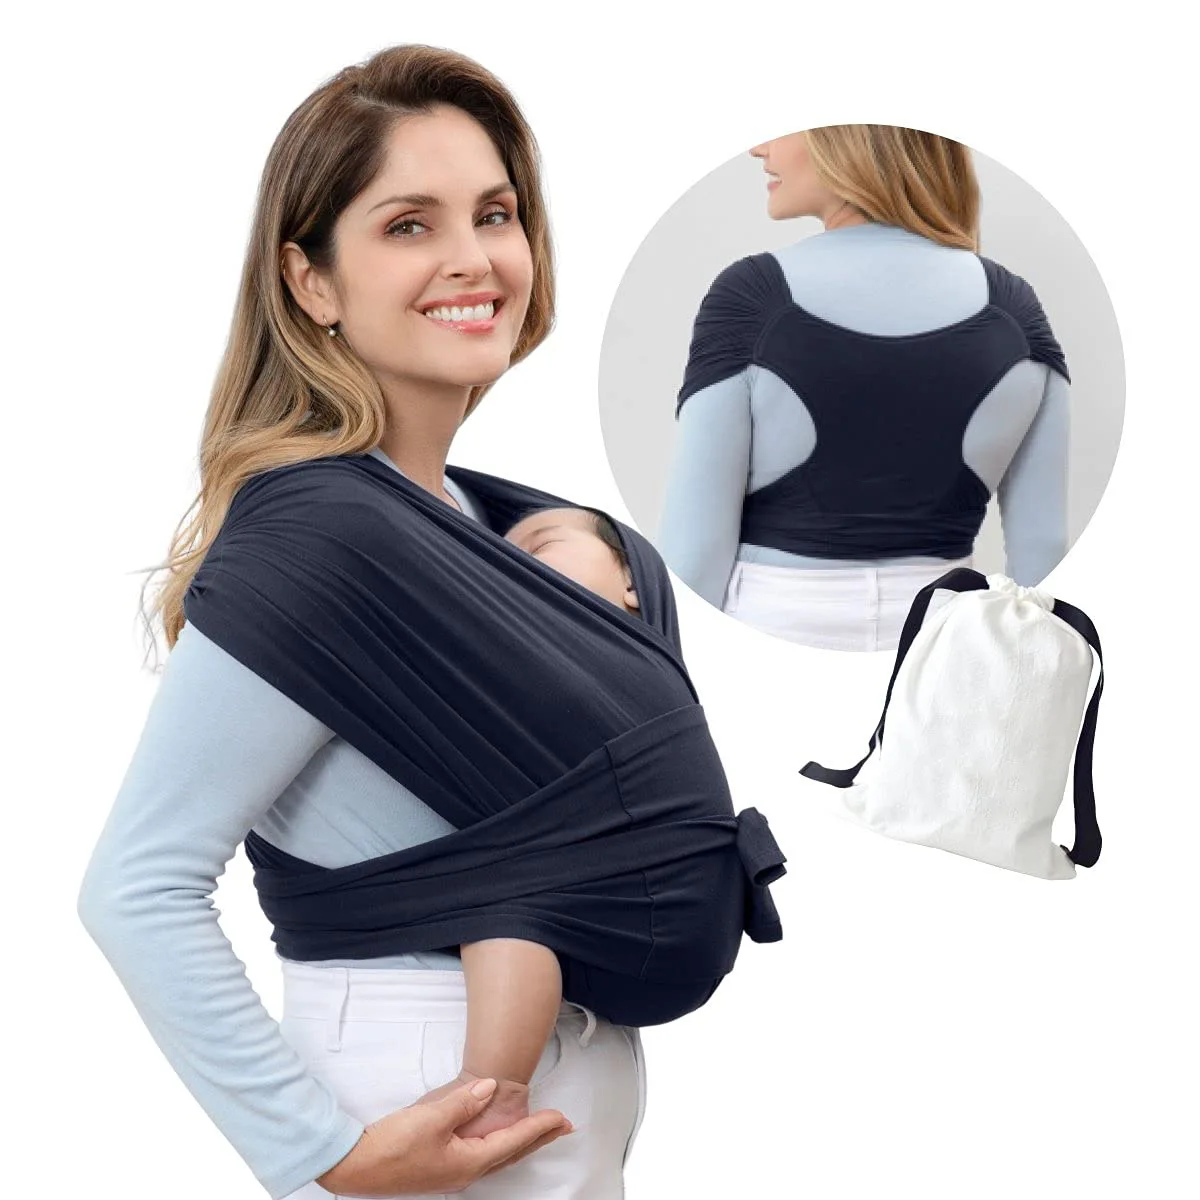 

Multifunction Baby Newborn Carrier Sling Strap Soft Wrap Breathable Cotton Infant Carriers Backpack Hipseat Stroller Accessories